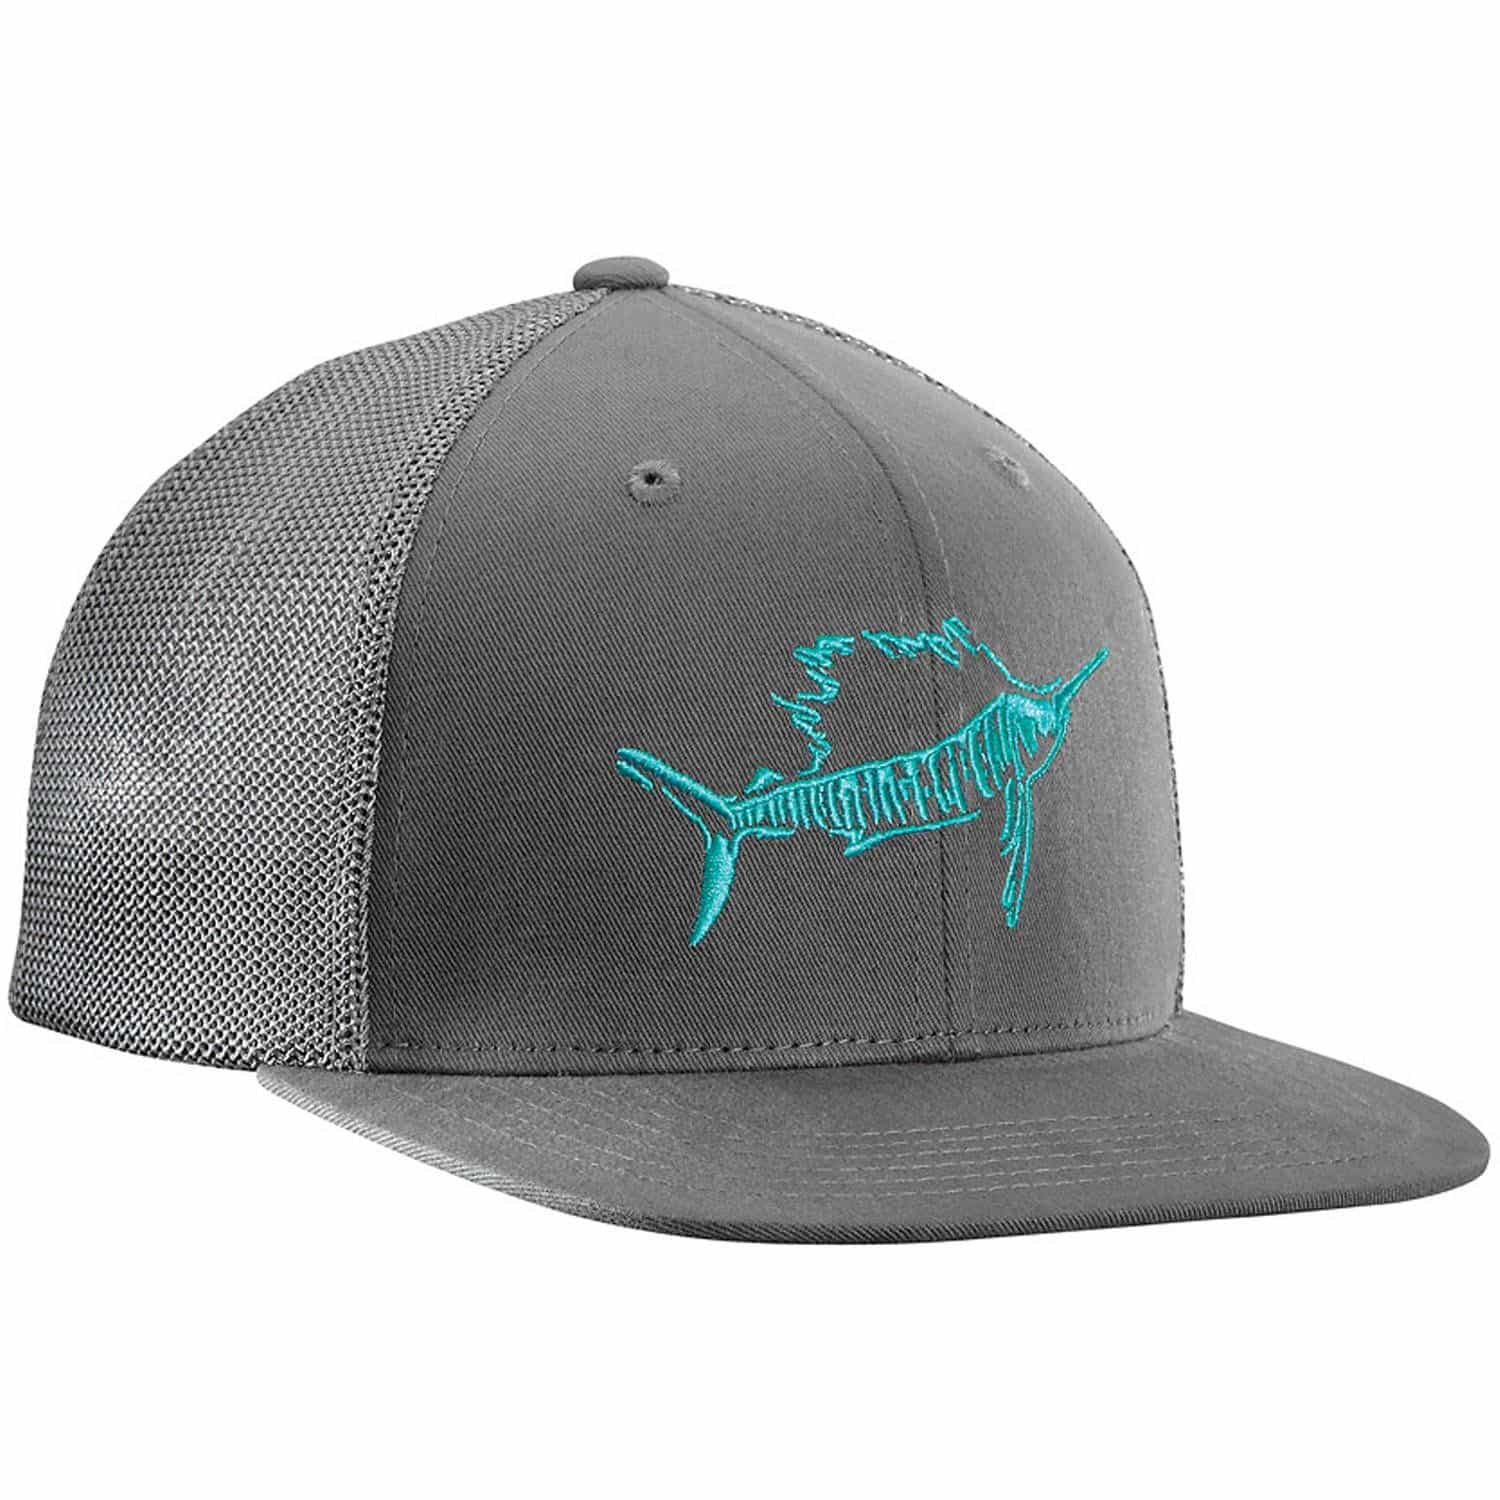 Flying Fisherman Sailfish Fitted Trucker Hat -$8.98(45% Off)